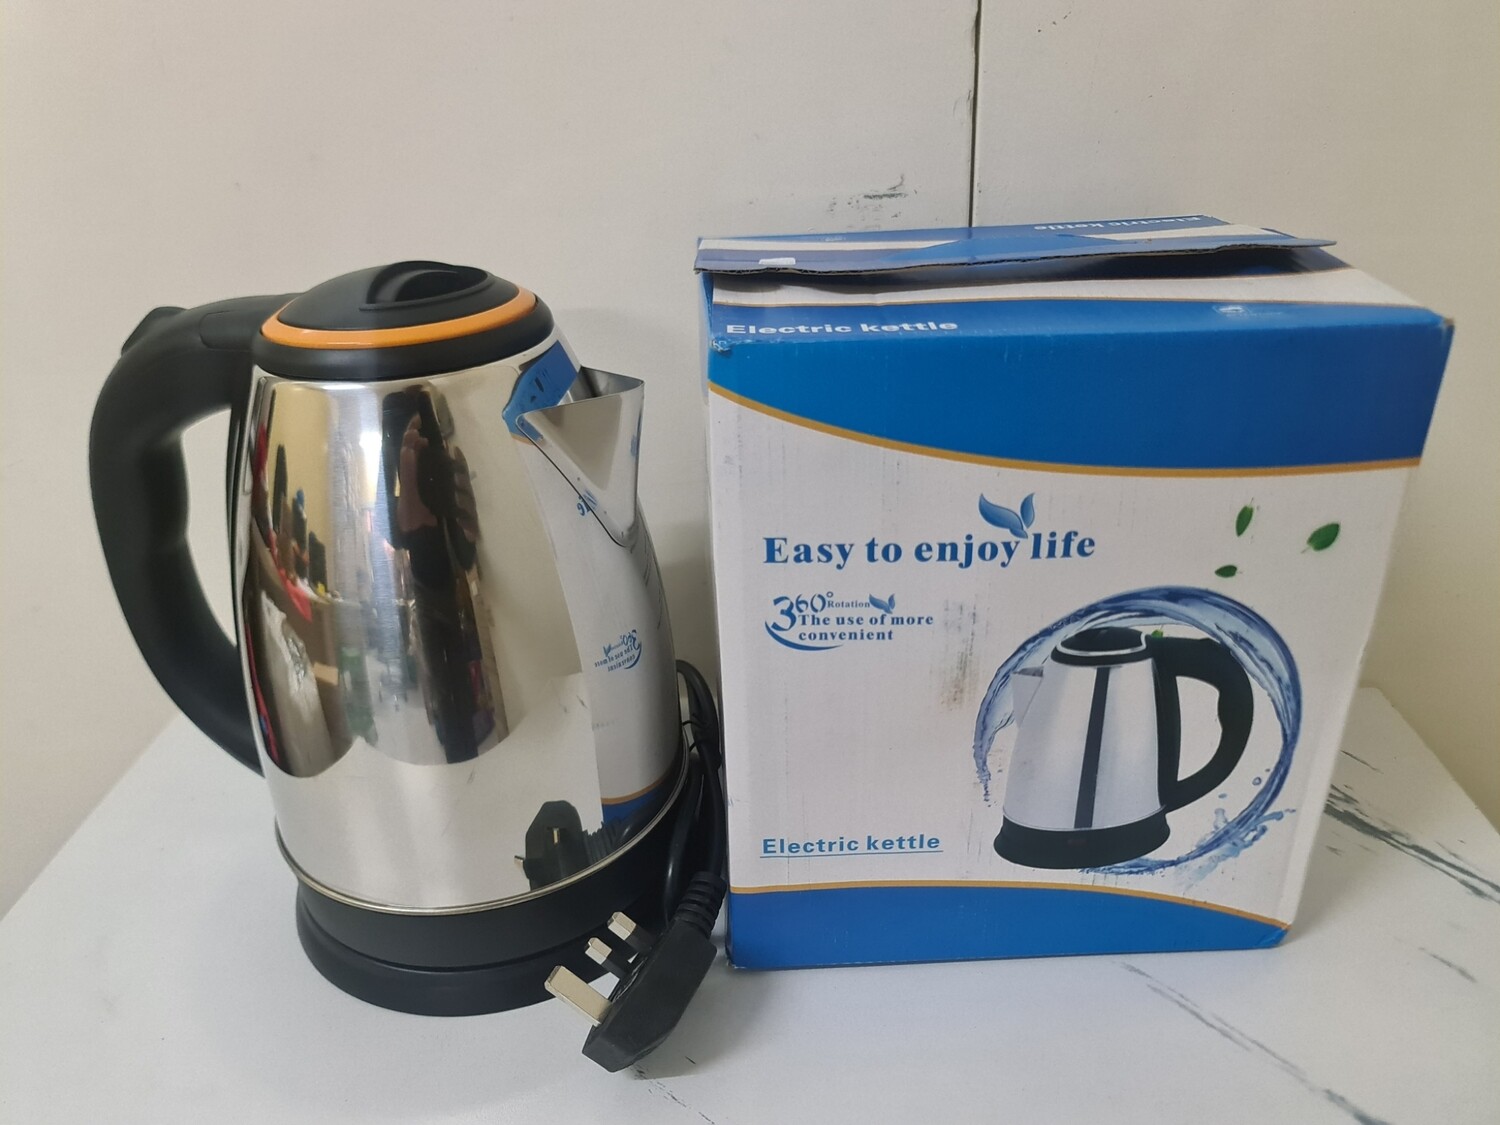 Generic Stainless Steel Electric Kettle 1.8L - Easy Life 1500W #XDM-15-18A Easy Life